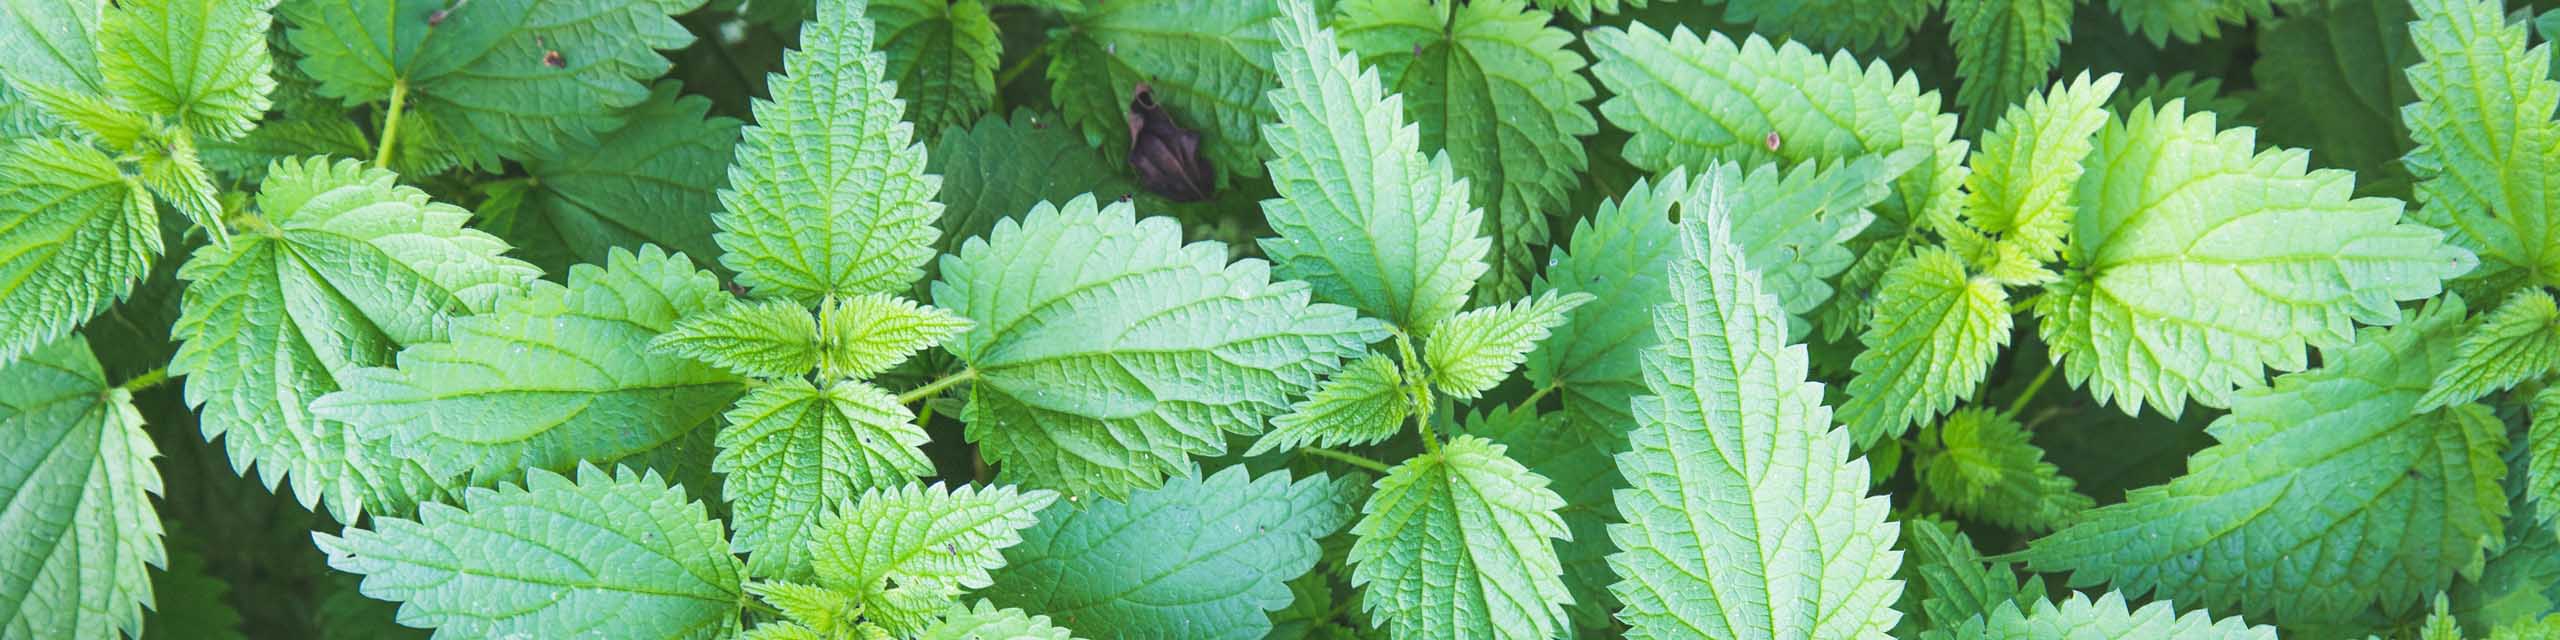 Top view of stinging nettle plants.